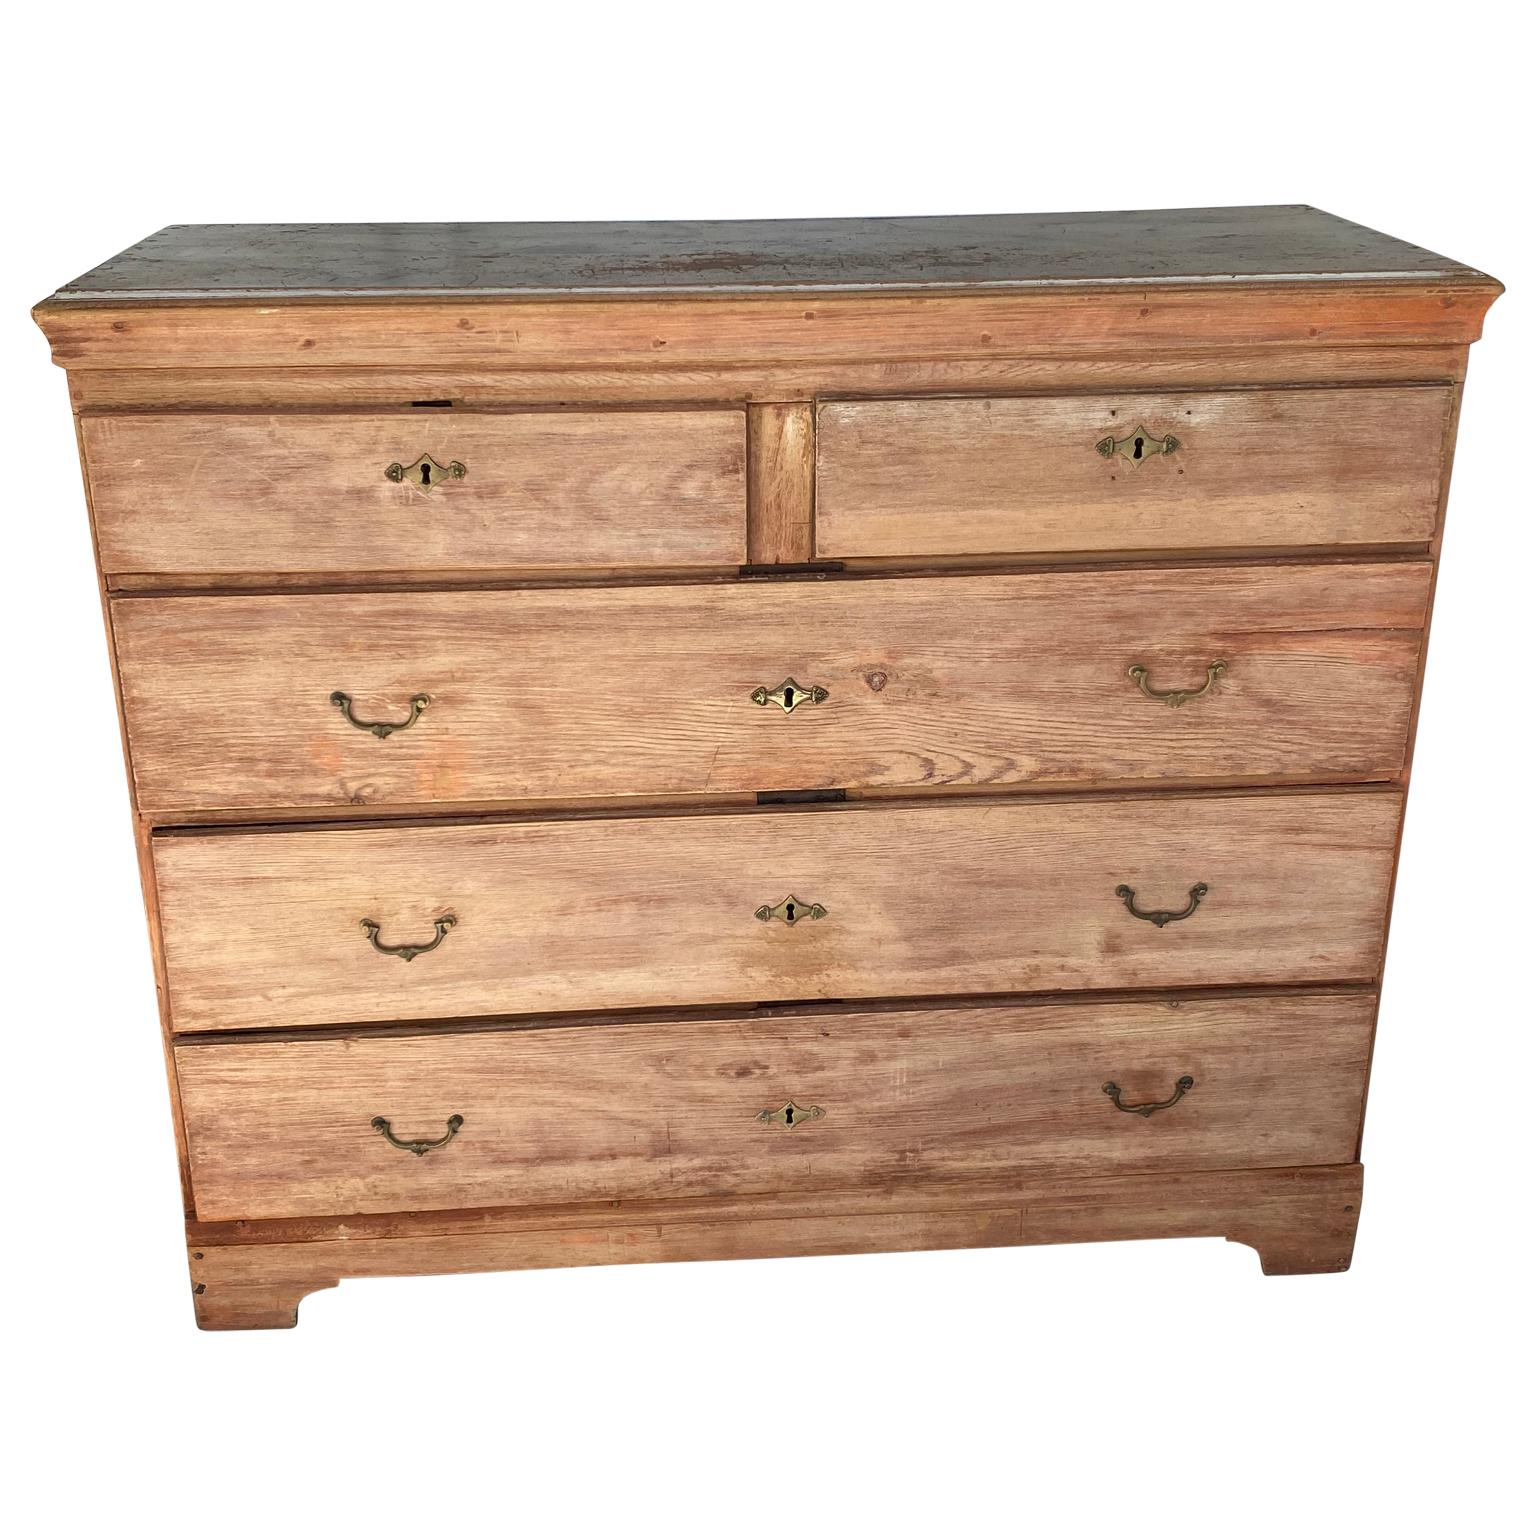 Swedish Gustavian chest of 6 drawers with blueish faux marble top
Dresser has brass hardware and original locks.